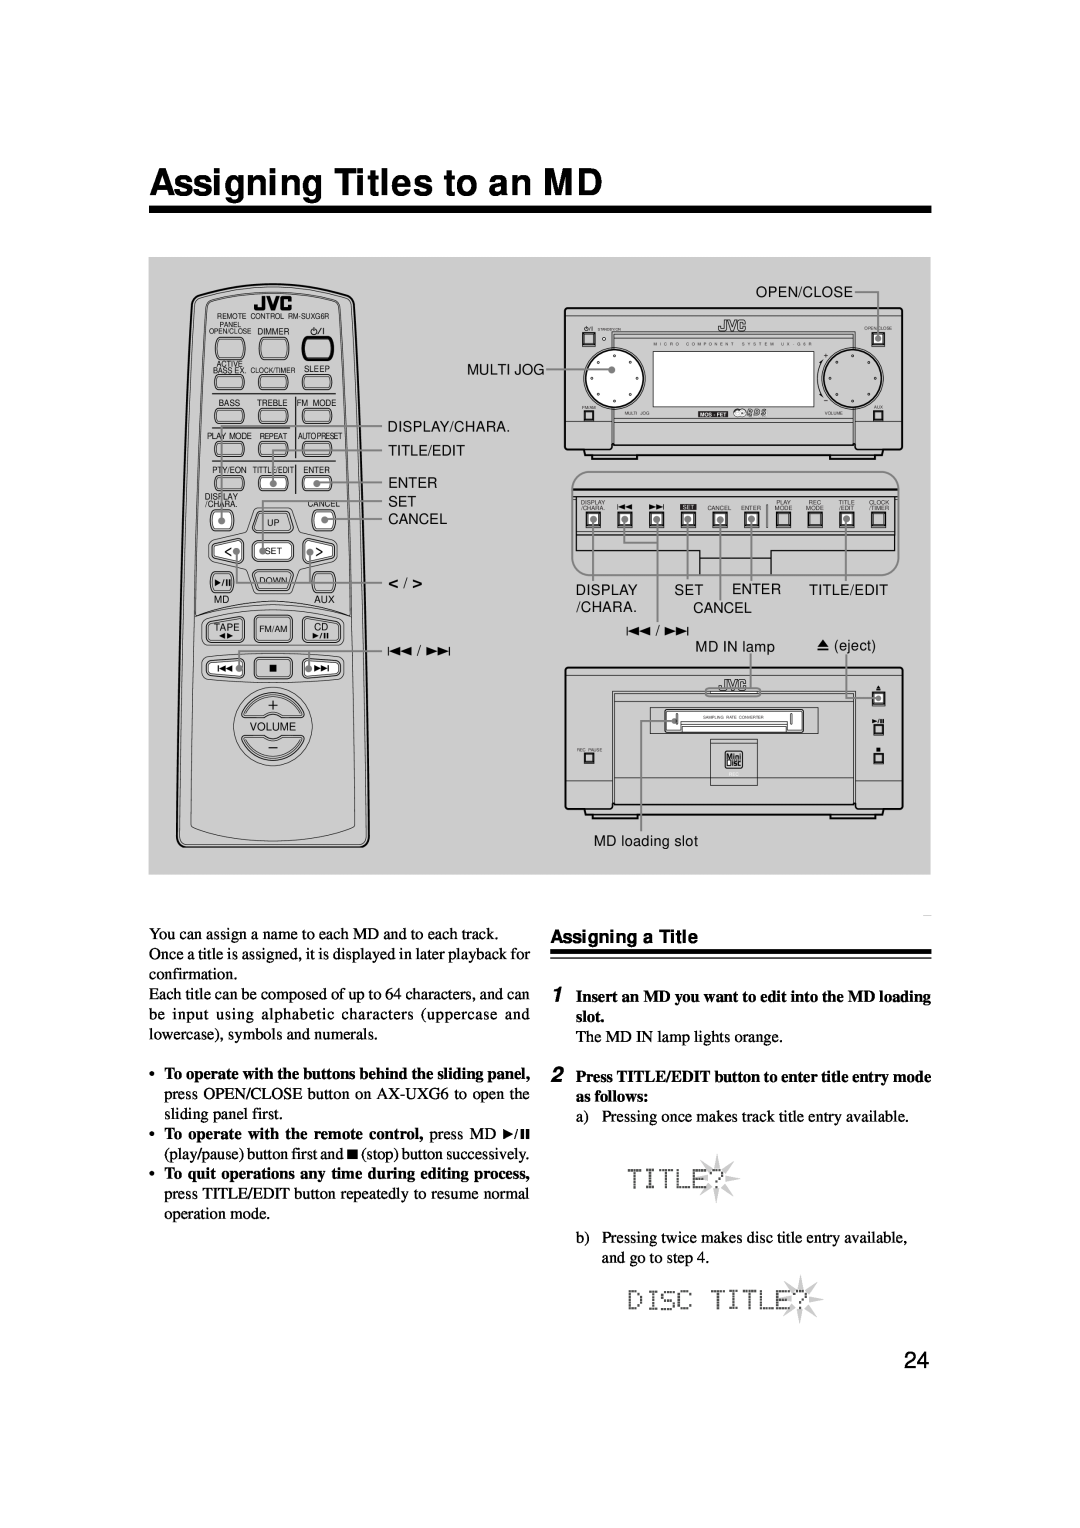 JVC XM-G6 manual Assigning Titles to an MD, Assigning a Title 